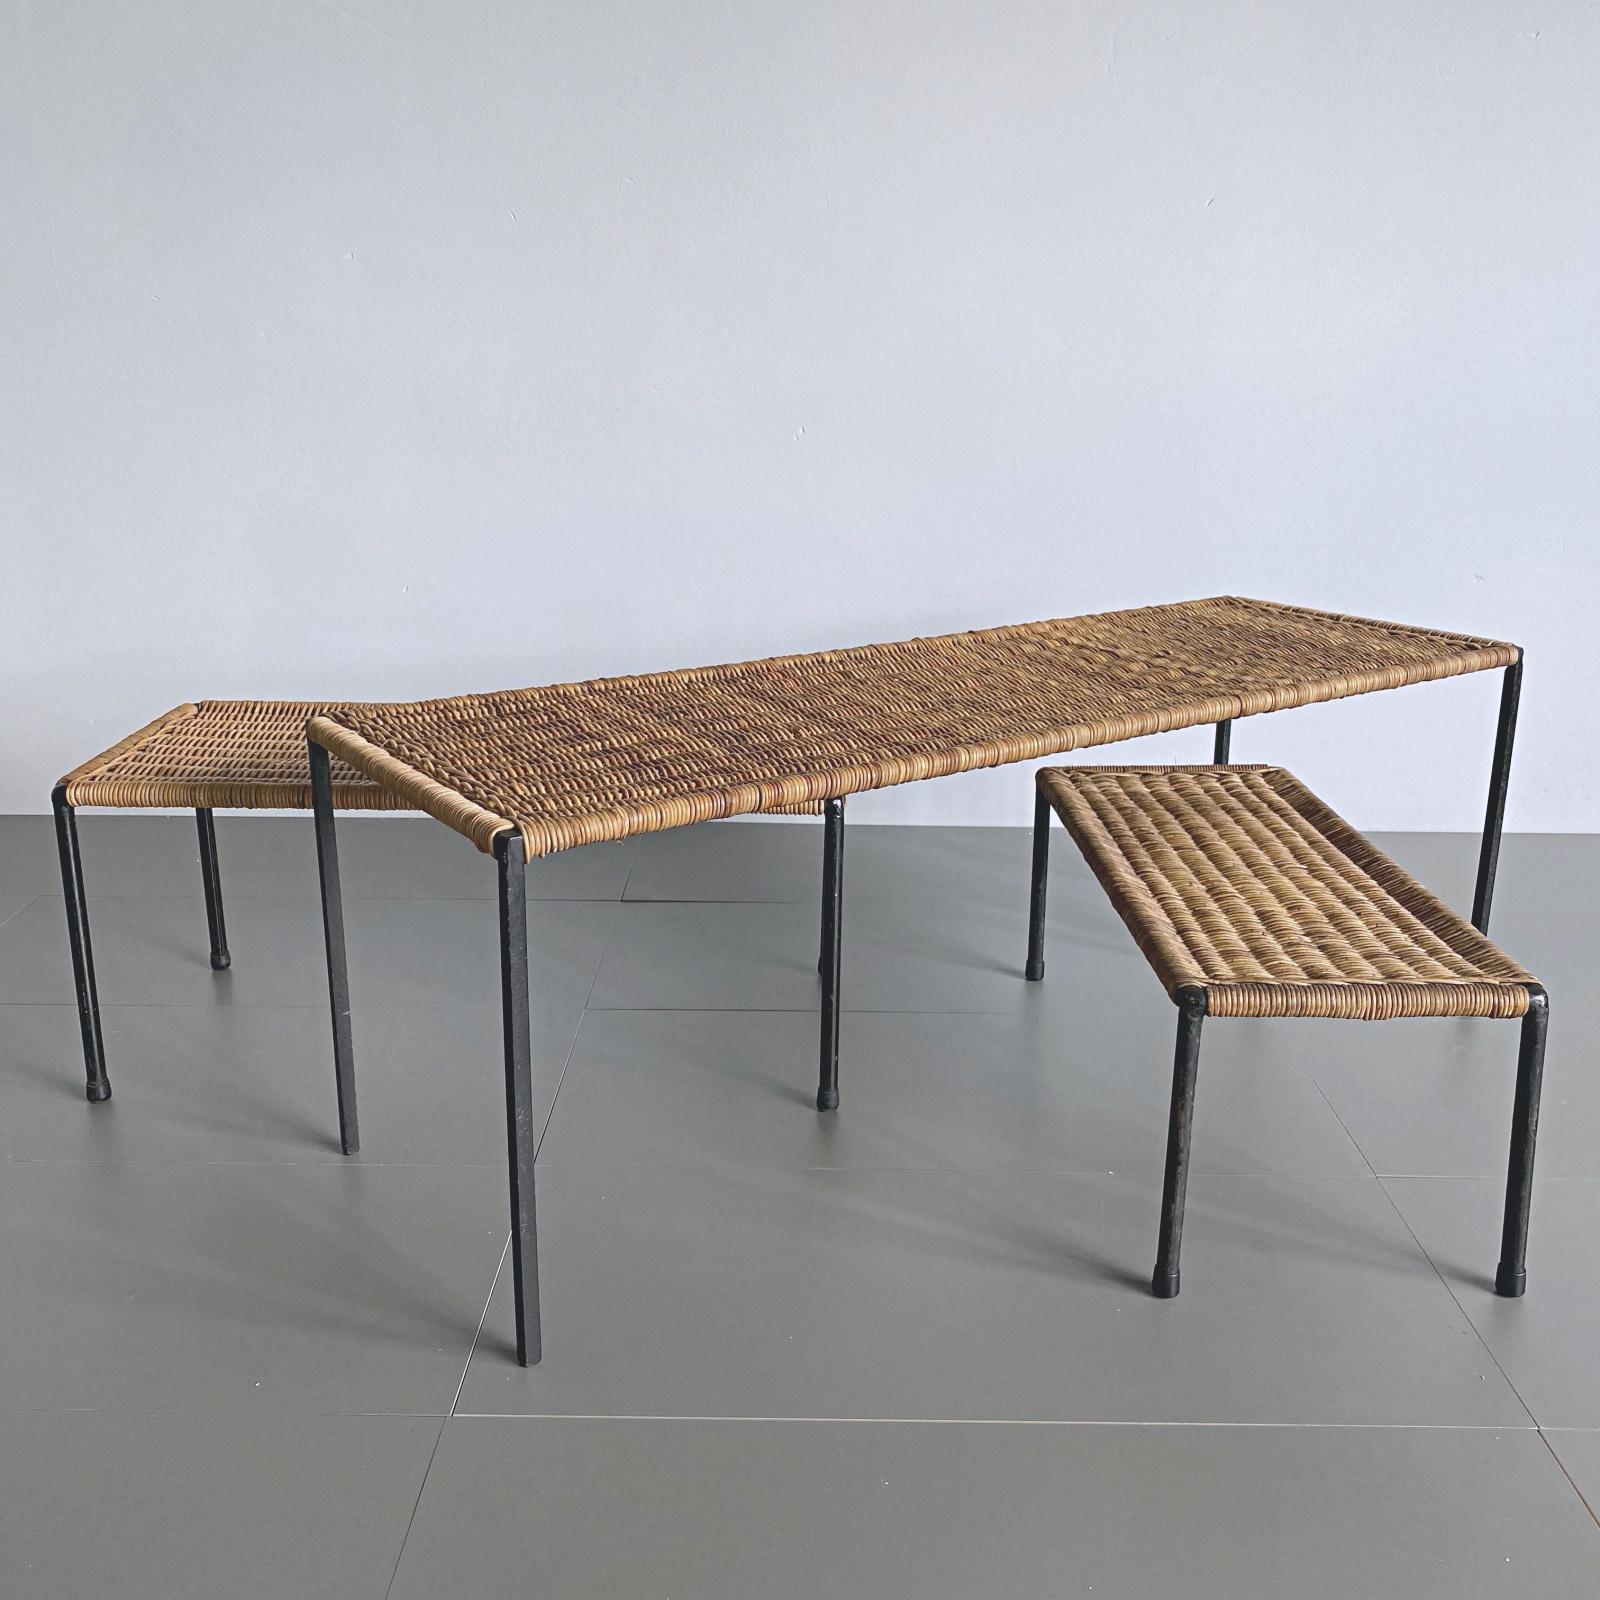 Beautiful and authentic rattan coffee and side tables, manufactured by Carl Auböck Werkstätte in the 1950s, Vienna. The frames are made of black lacquered steel with woven rattan top. The tables can be used indoor and outdoor.

We ship only with